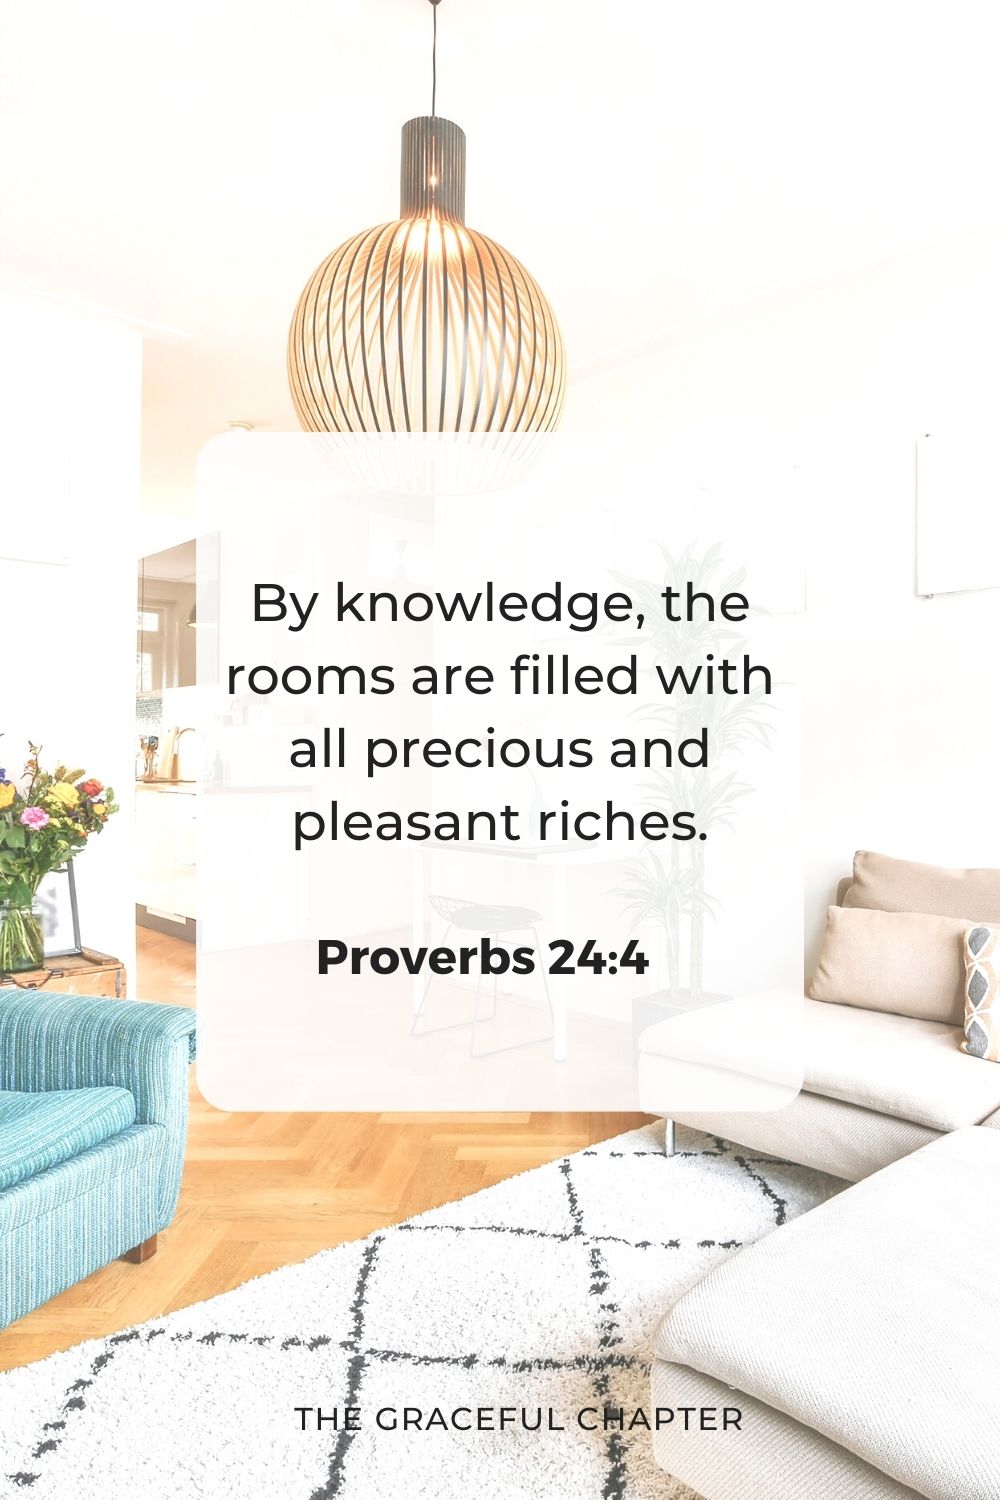 By knowledge, the rooms are filled with all precious and pleasant riches.